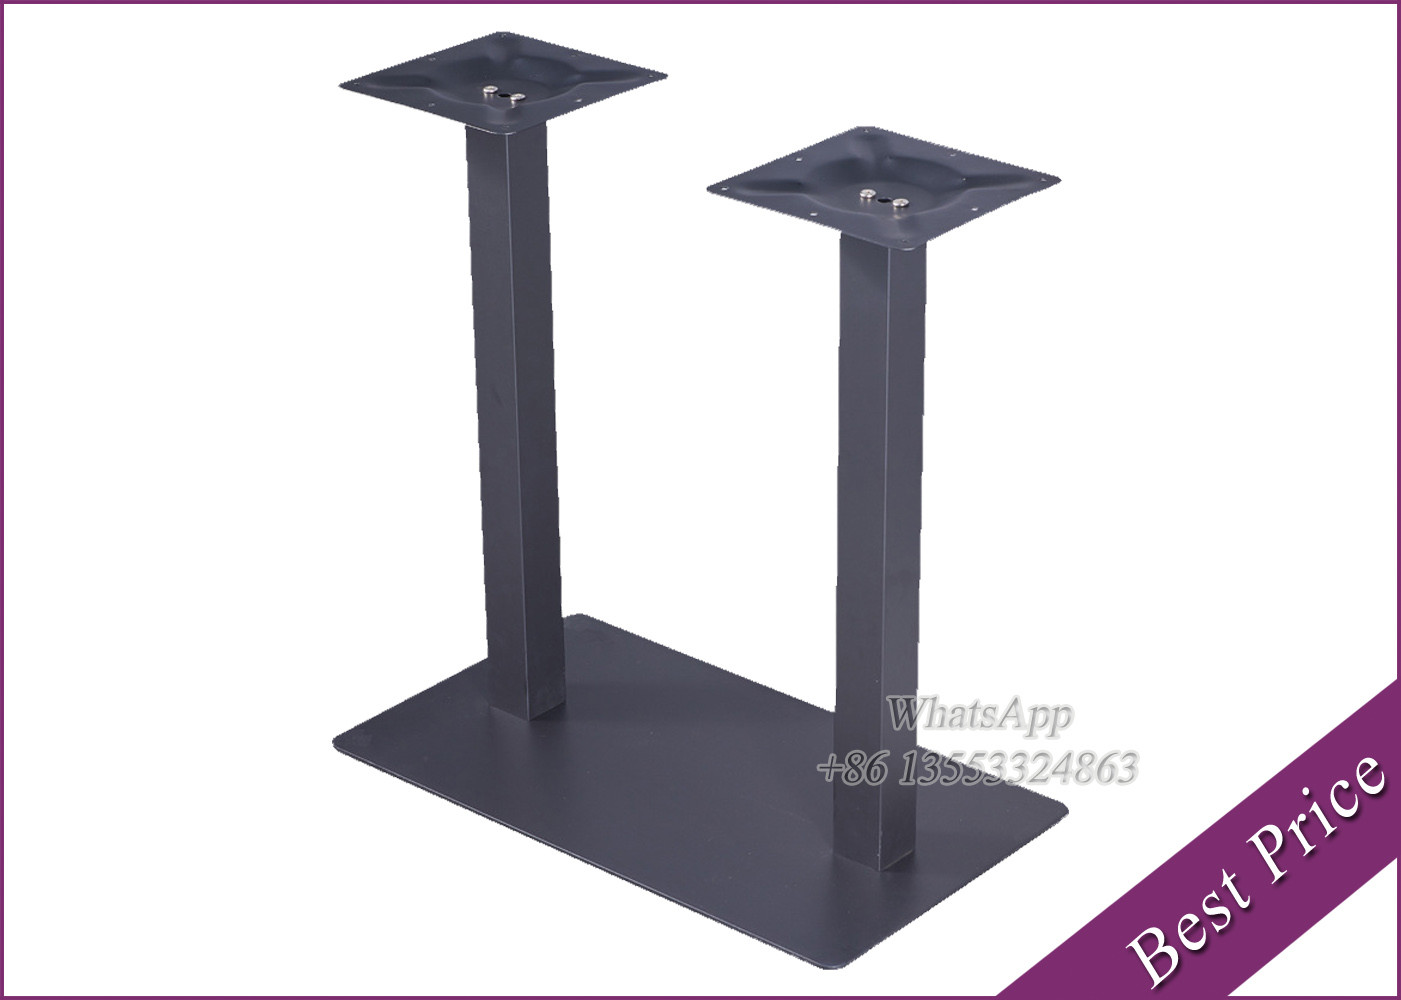 Modern Restaurant and Dining Table Bases For Sale with Good Price (YT-23)